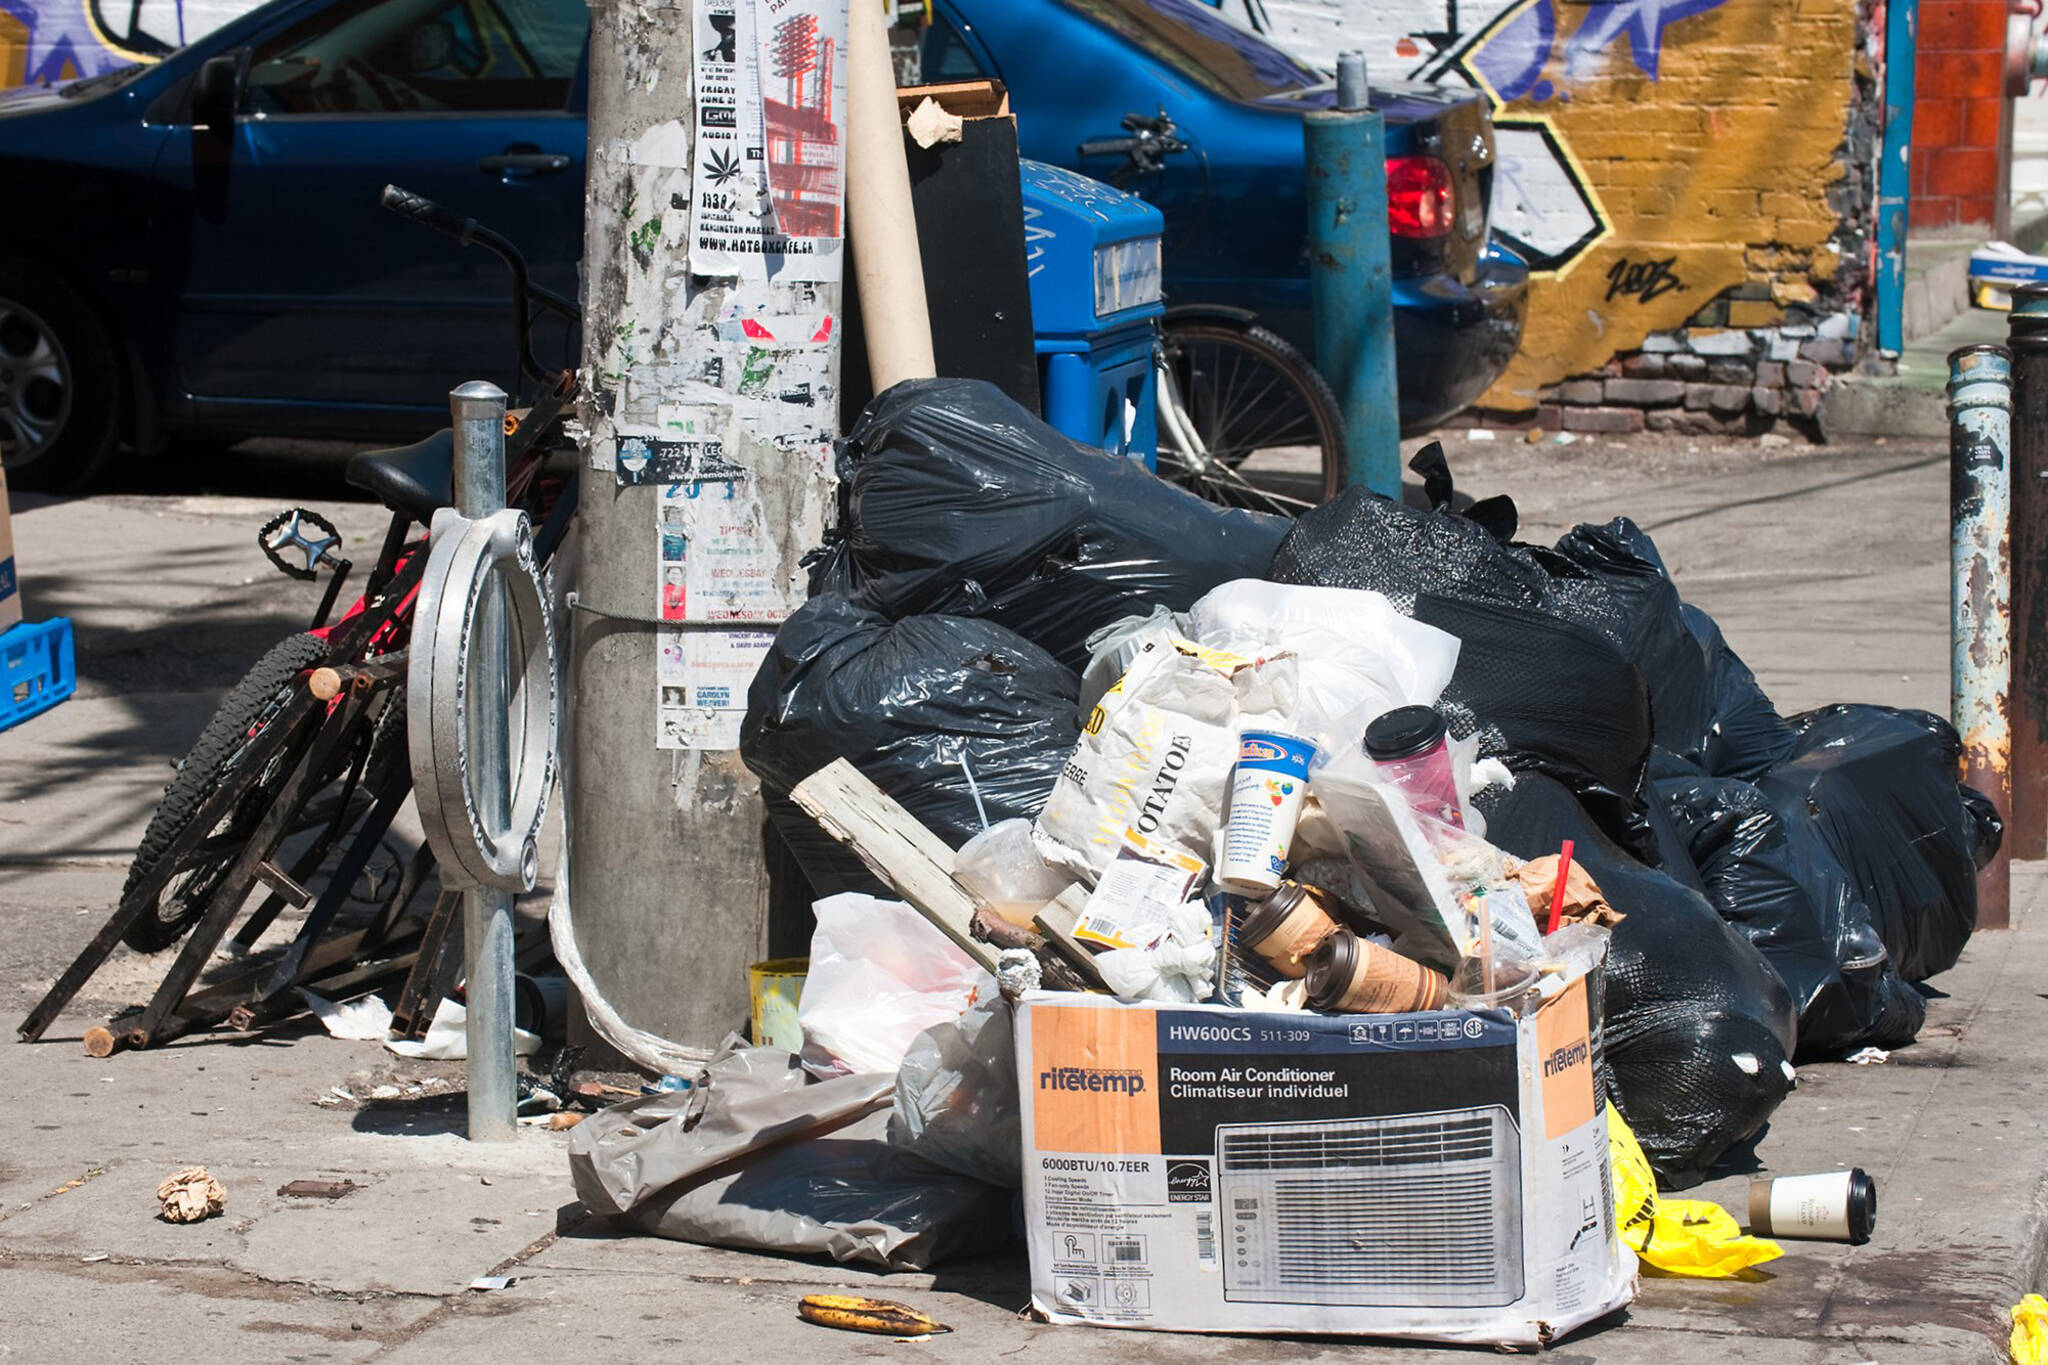 Toronto is now just one week away from a potential garbage strike